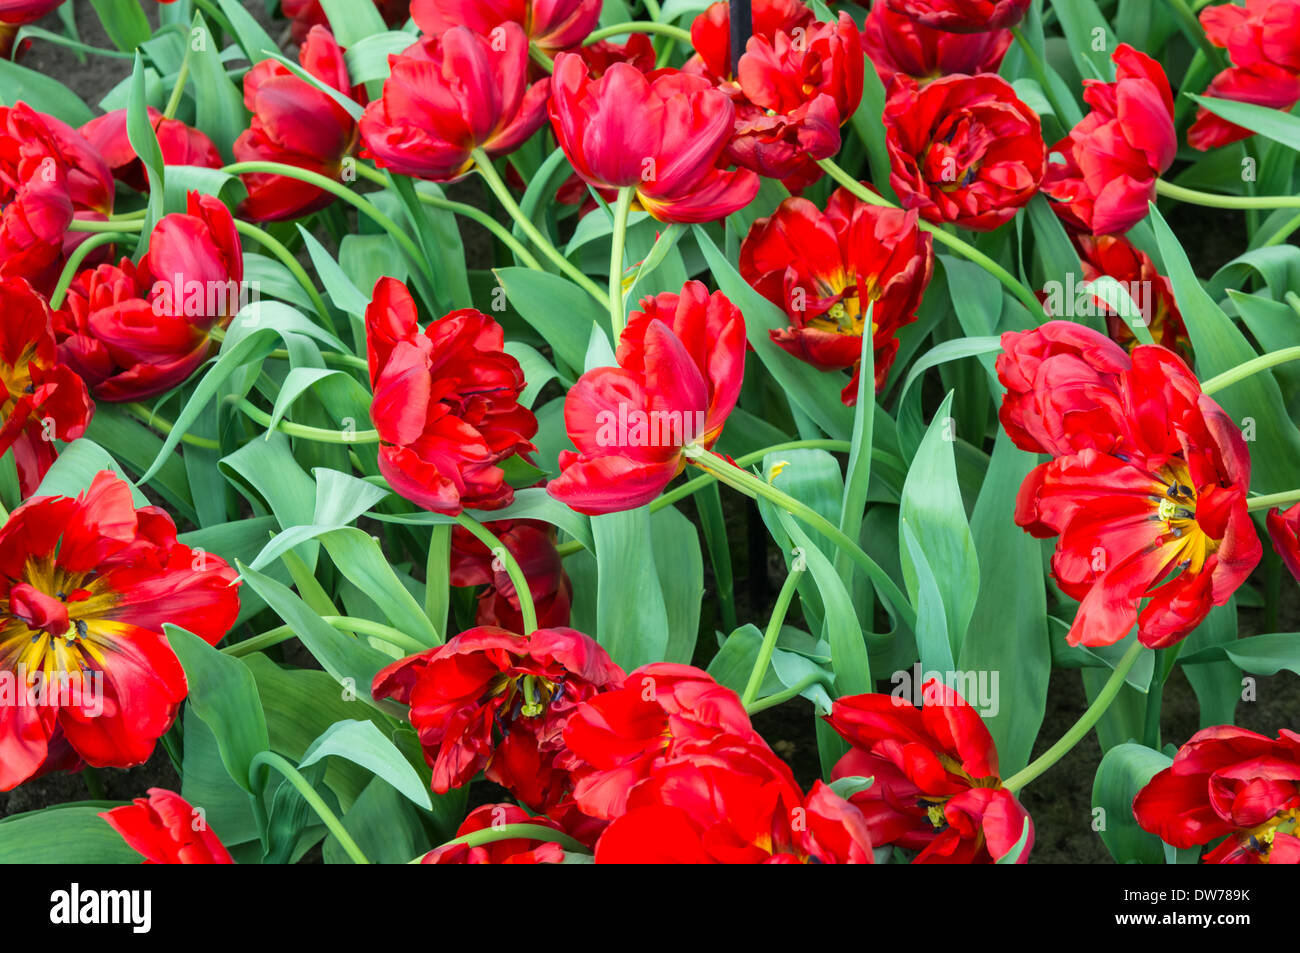 close up of wilting red tulips Stock Photo